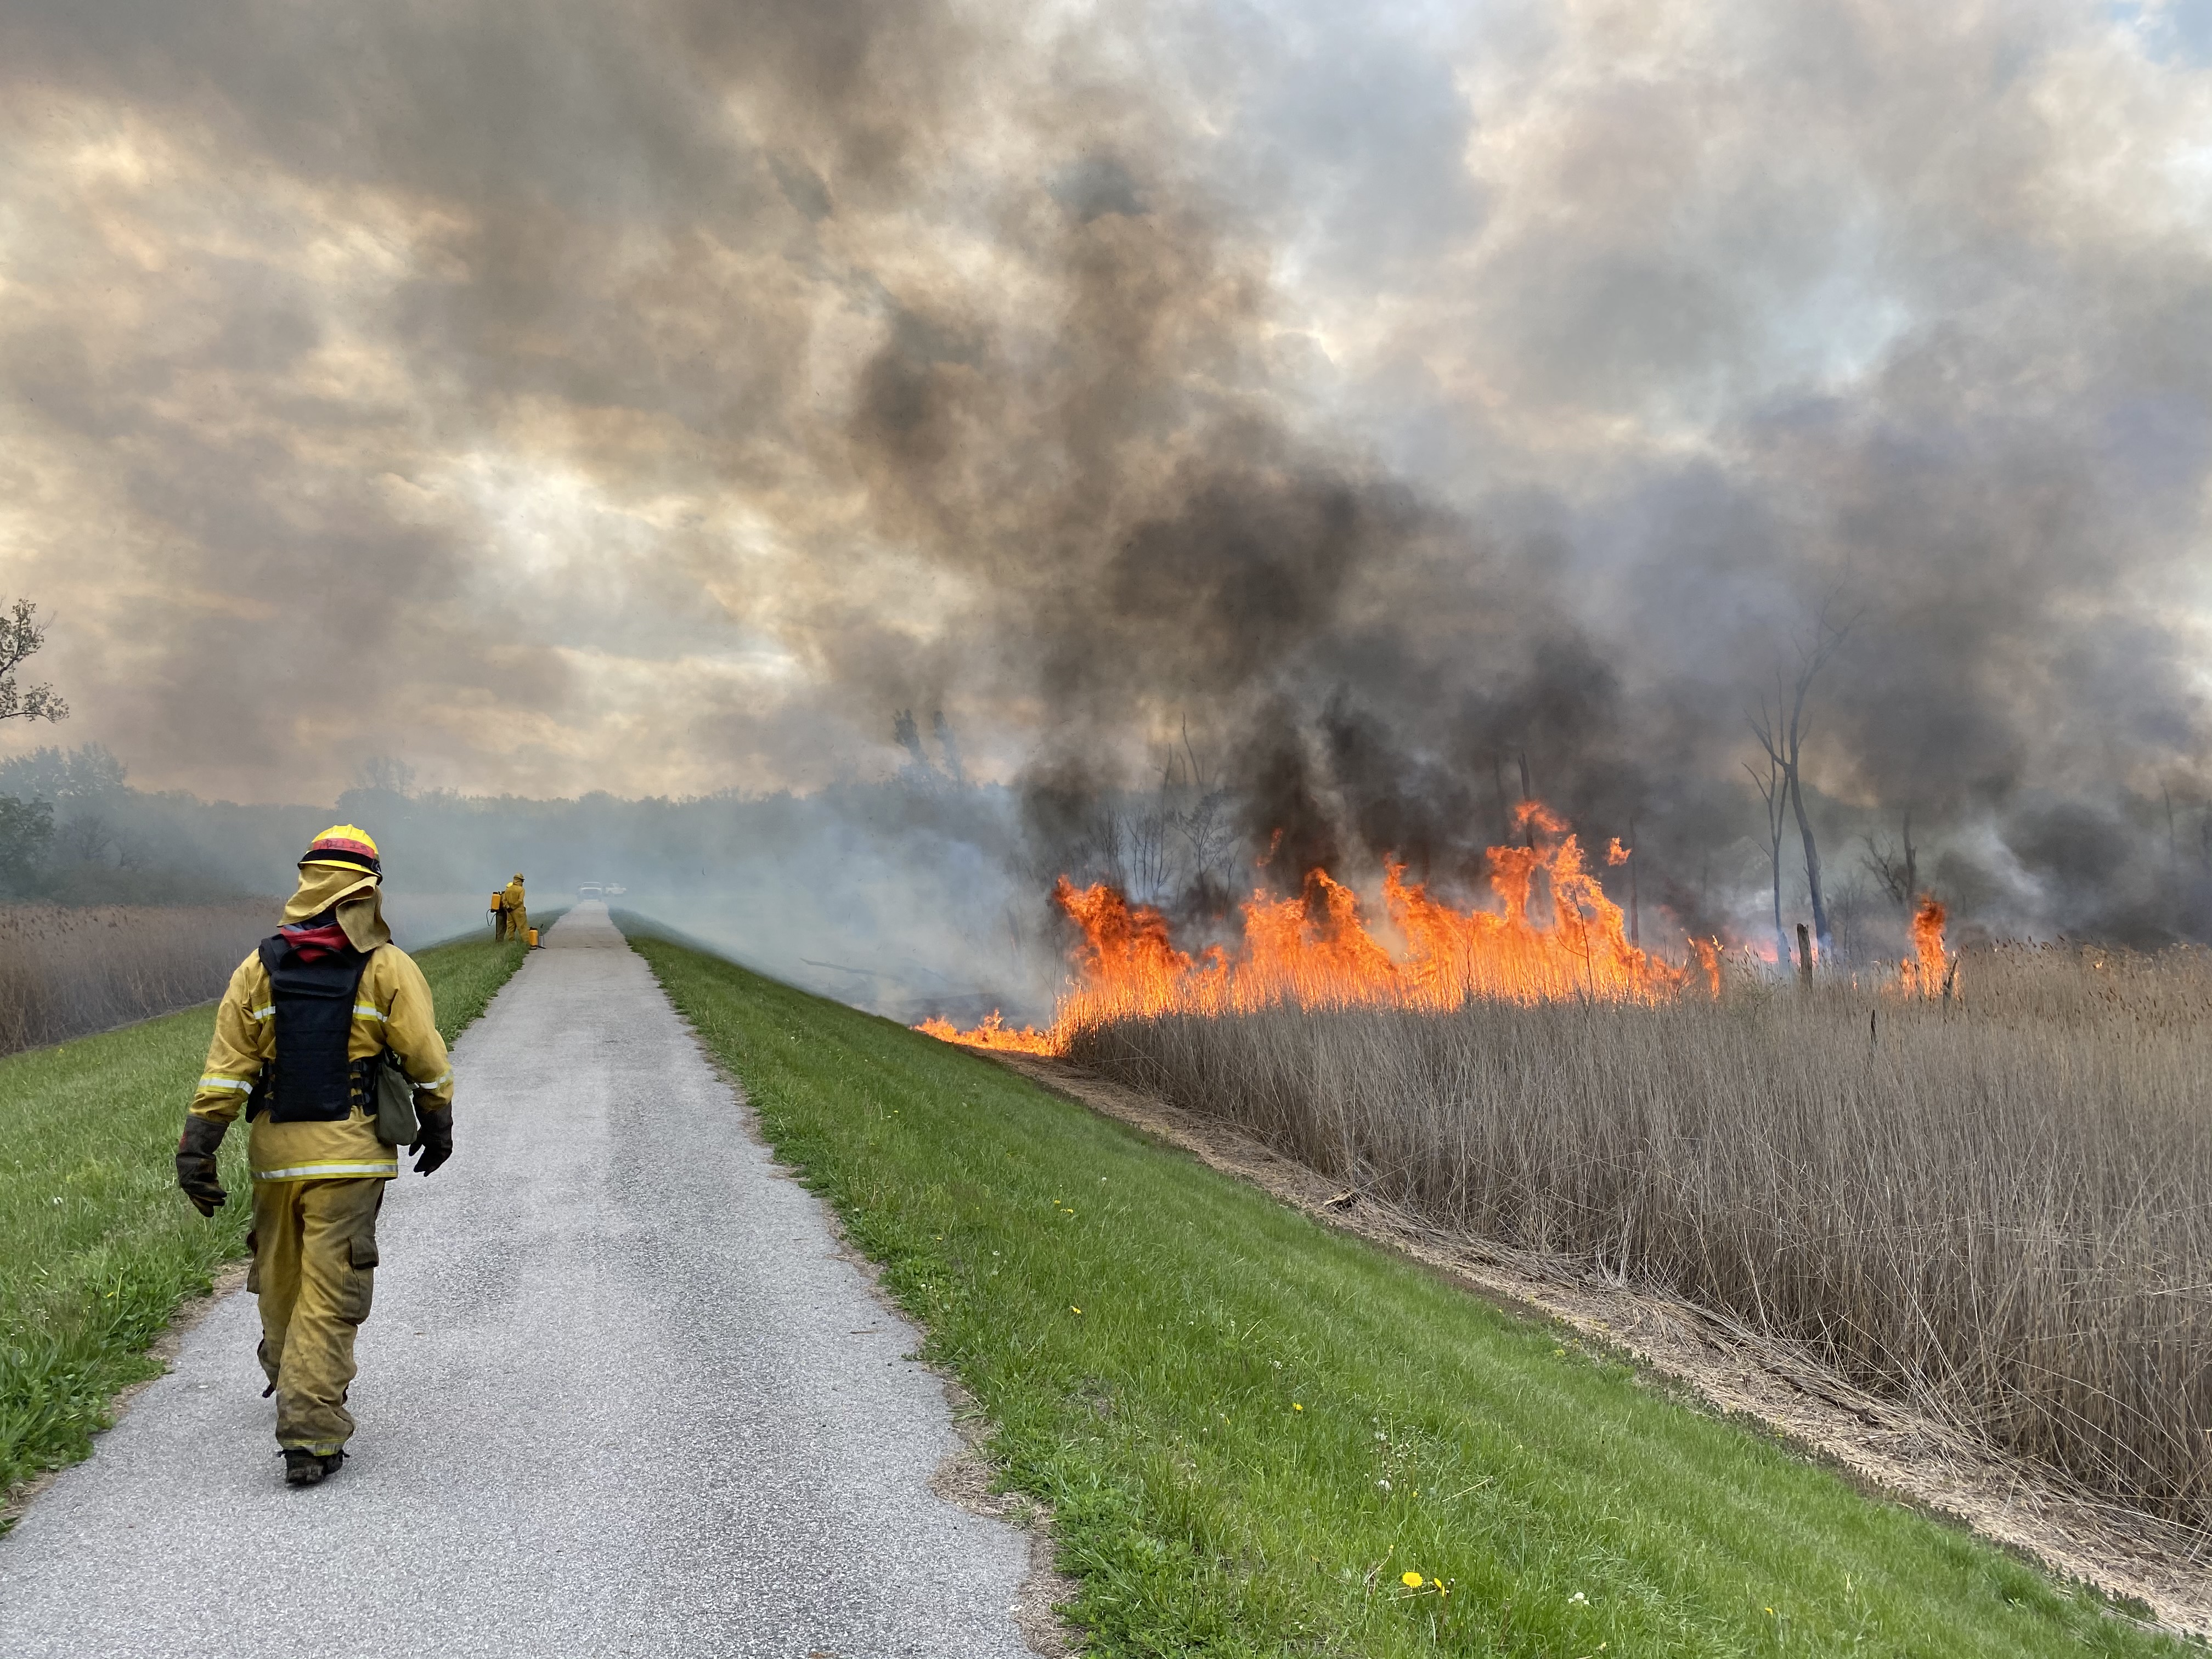 Prescribed burns play a critical role in maintaining a healthy ecosystem. Photo credit: Nicole Minadeo